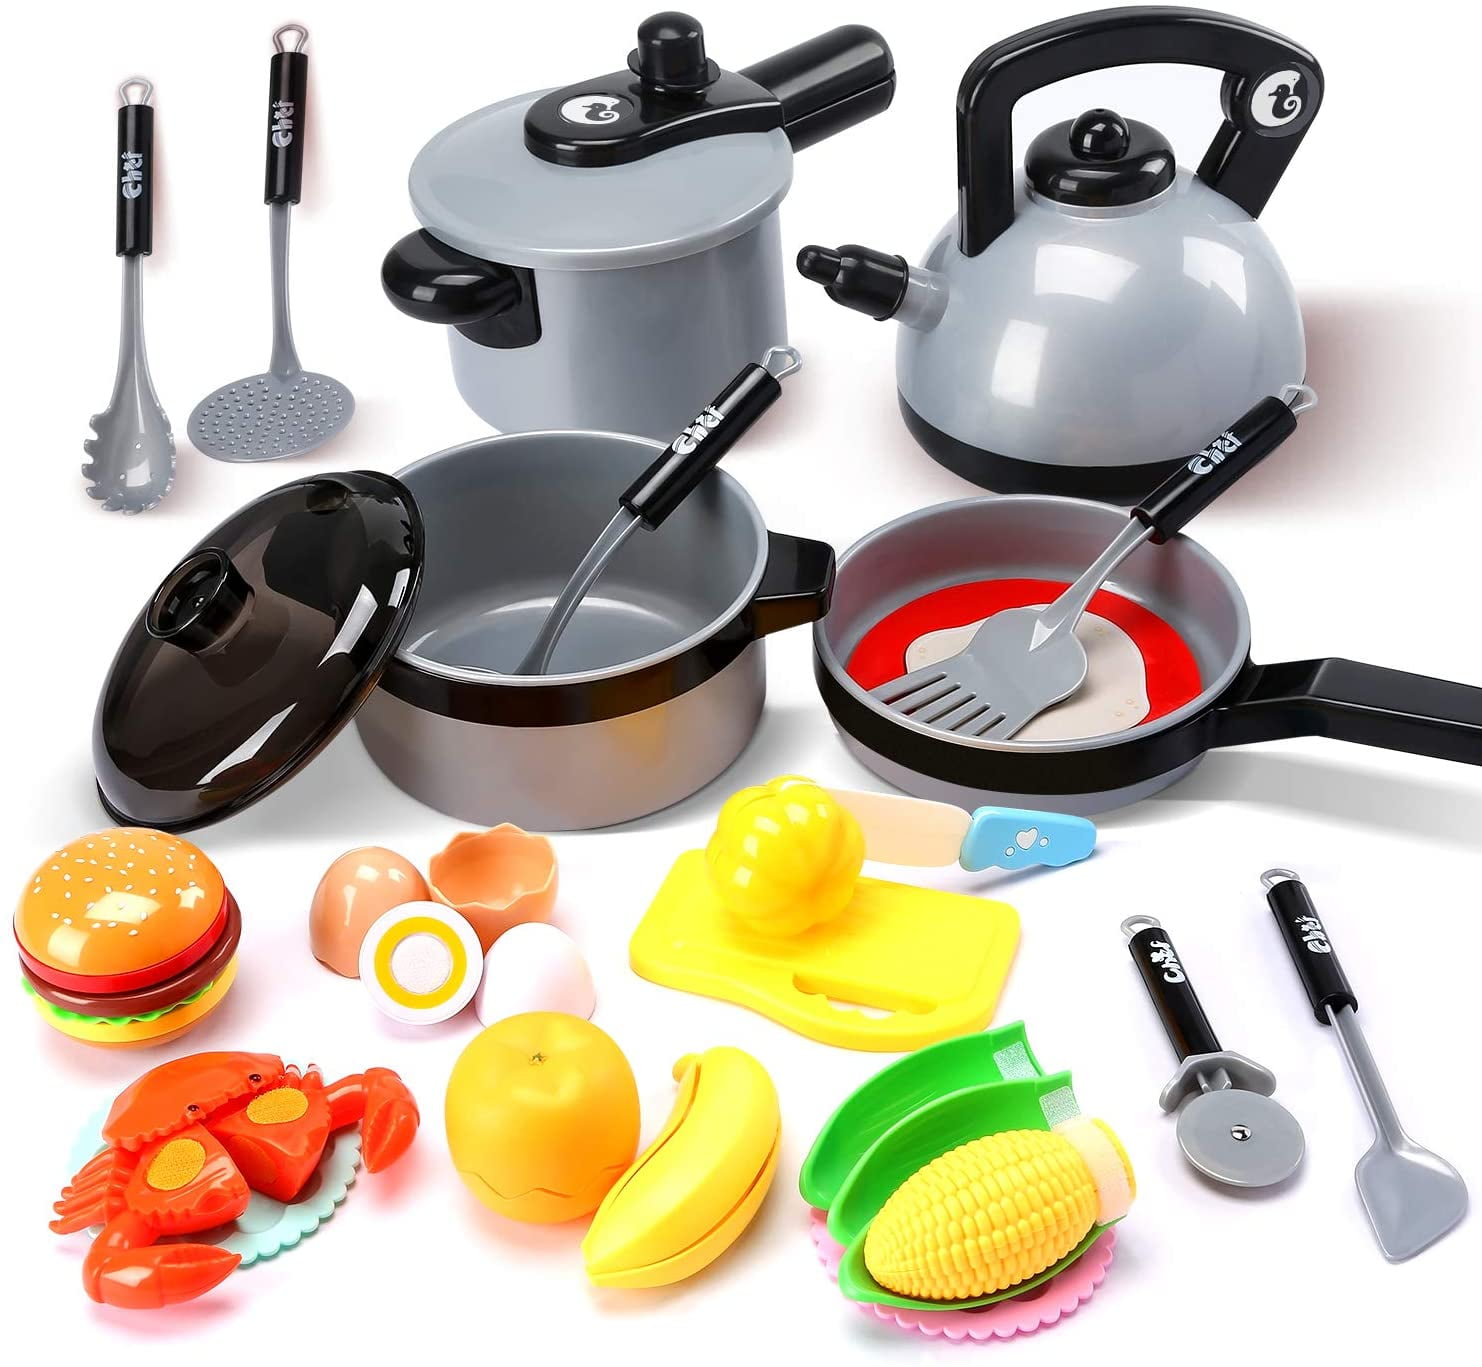 40PC Set Kids Play House Kitchen Toys Cookware Cooking Utensils Pots Pans Gift E 